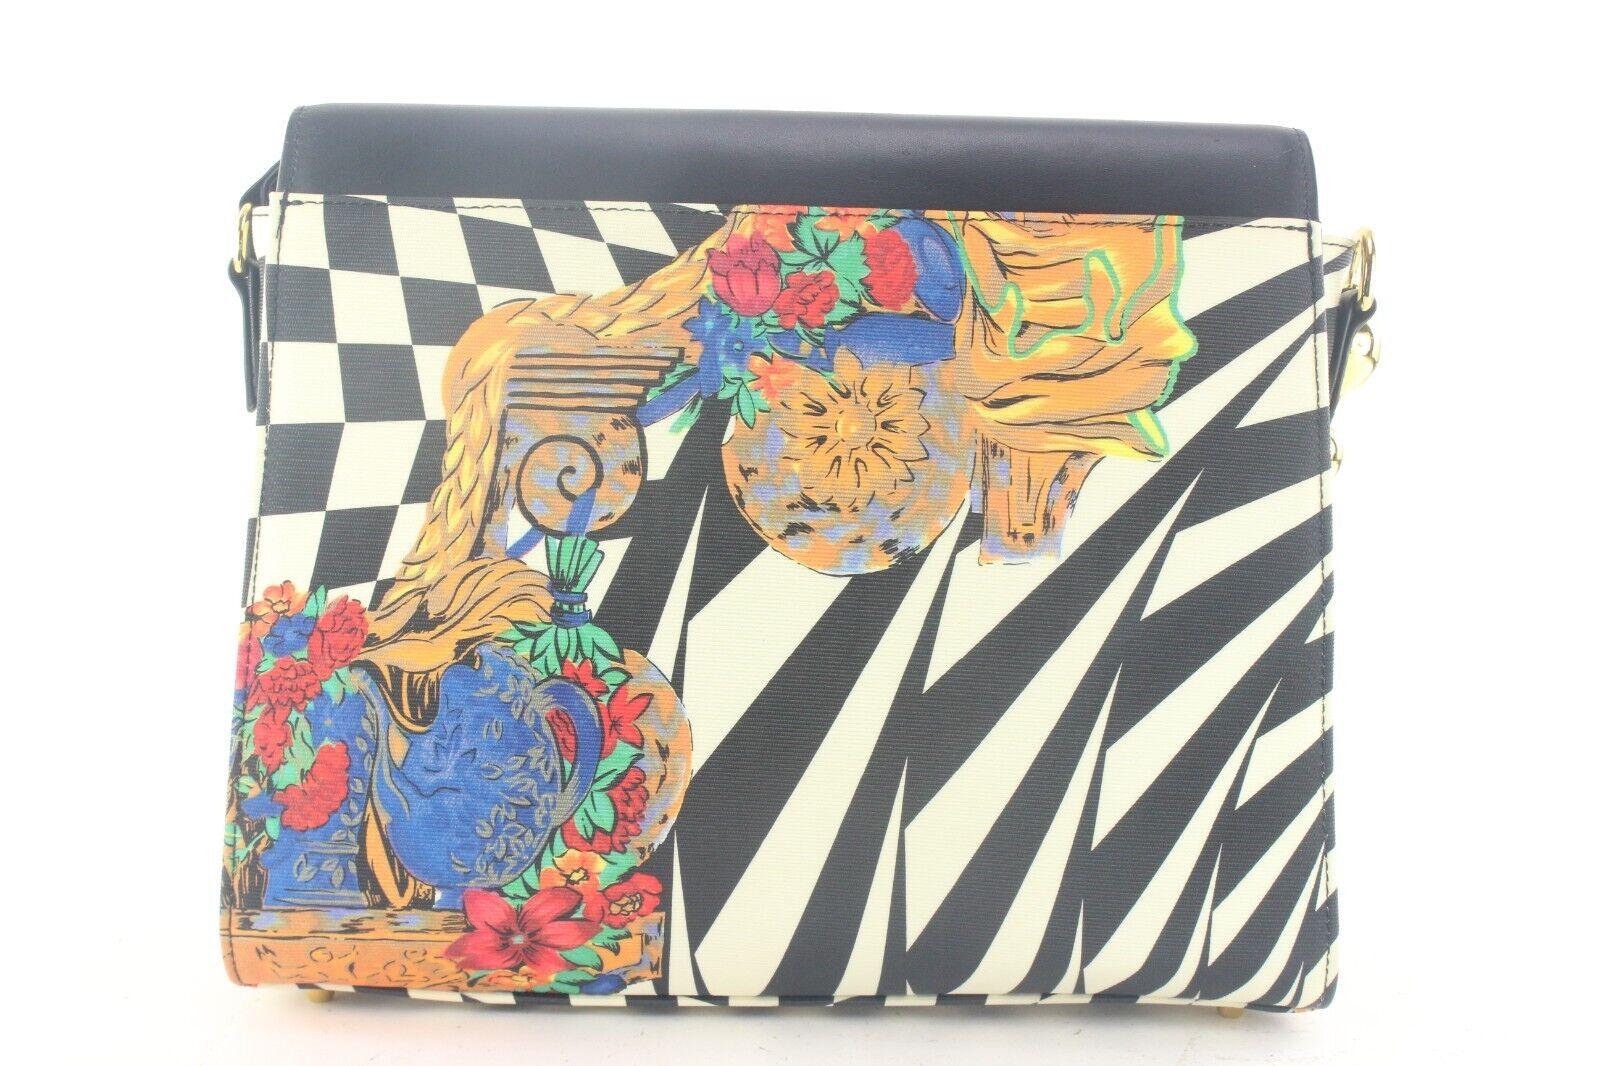 Gianni Versace Rare Psychedelic Illusion Crossbody 1GV912K In Good Condition For Sale In Dix hills, NY